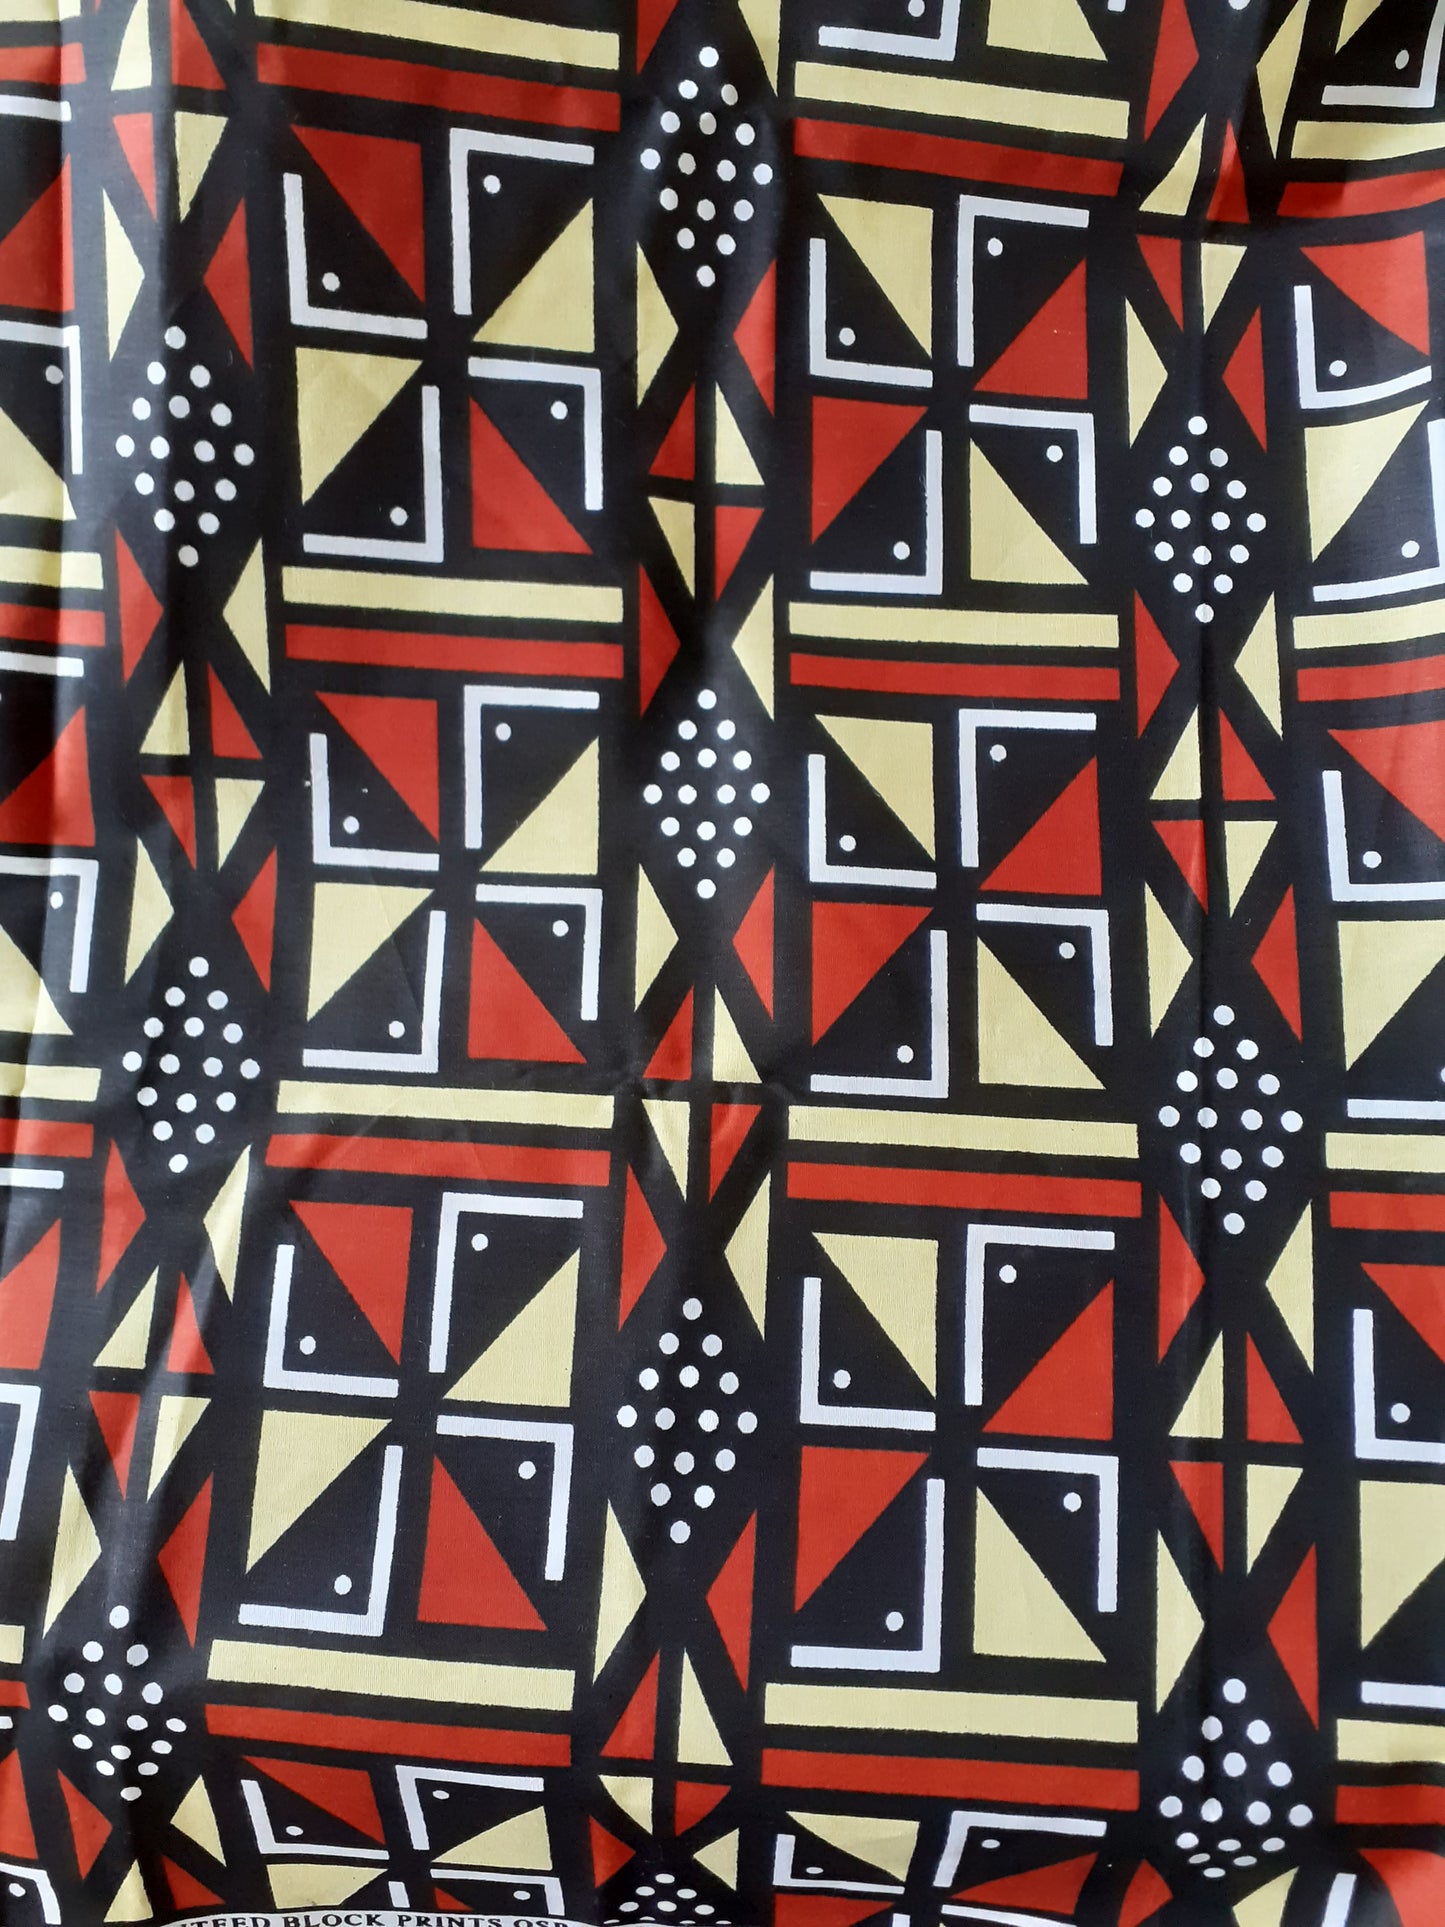 African Fabrics By the Yard - Mudcloth - Burnt Orange, Pale Yellow, Black, and White